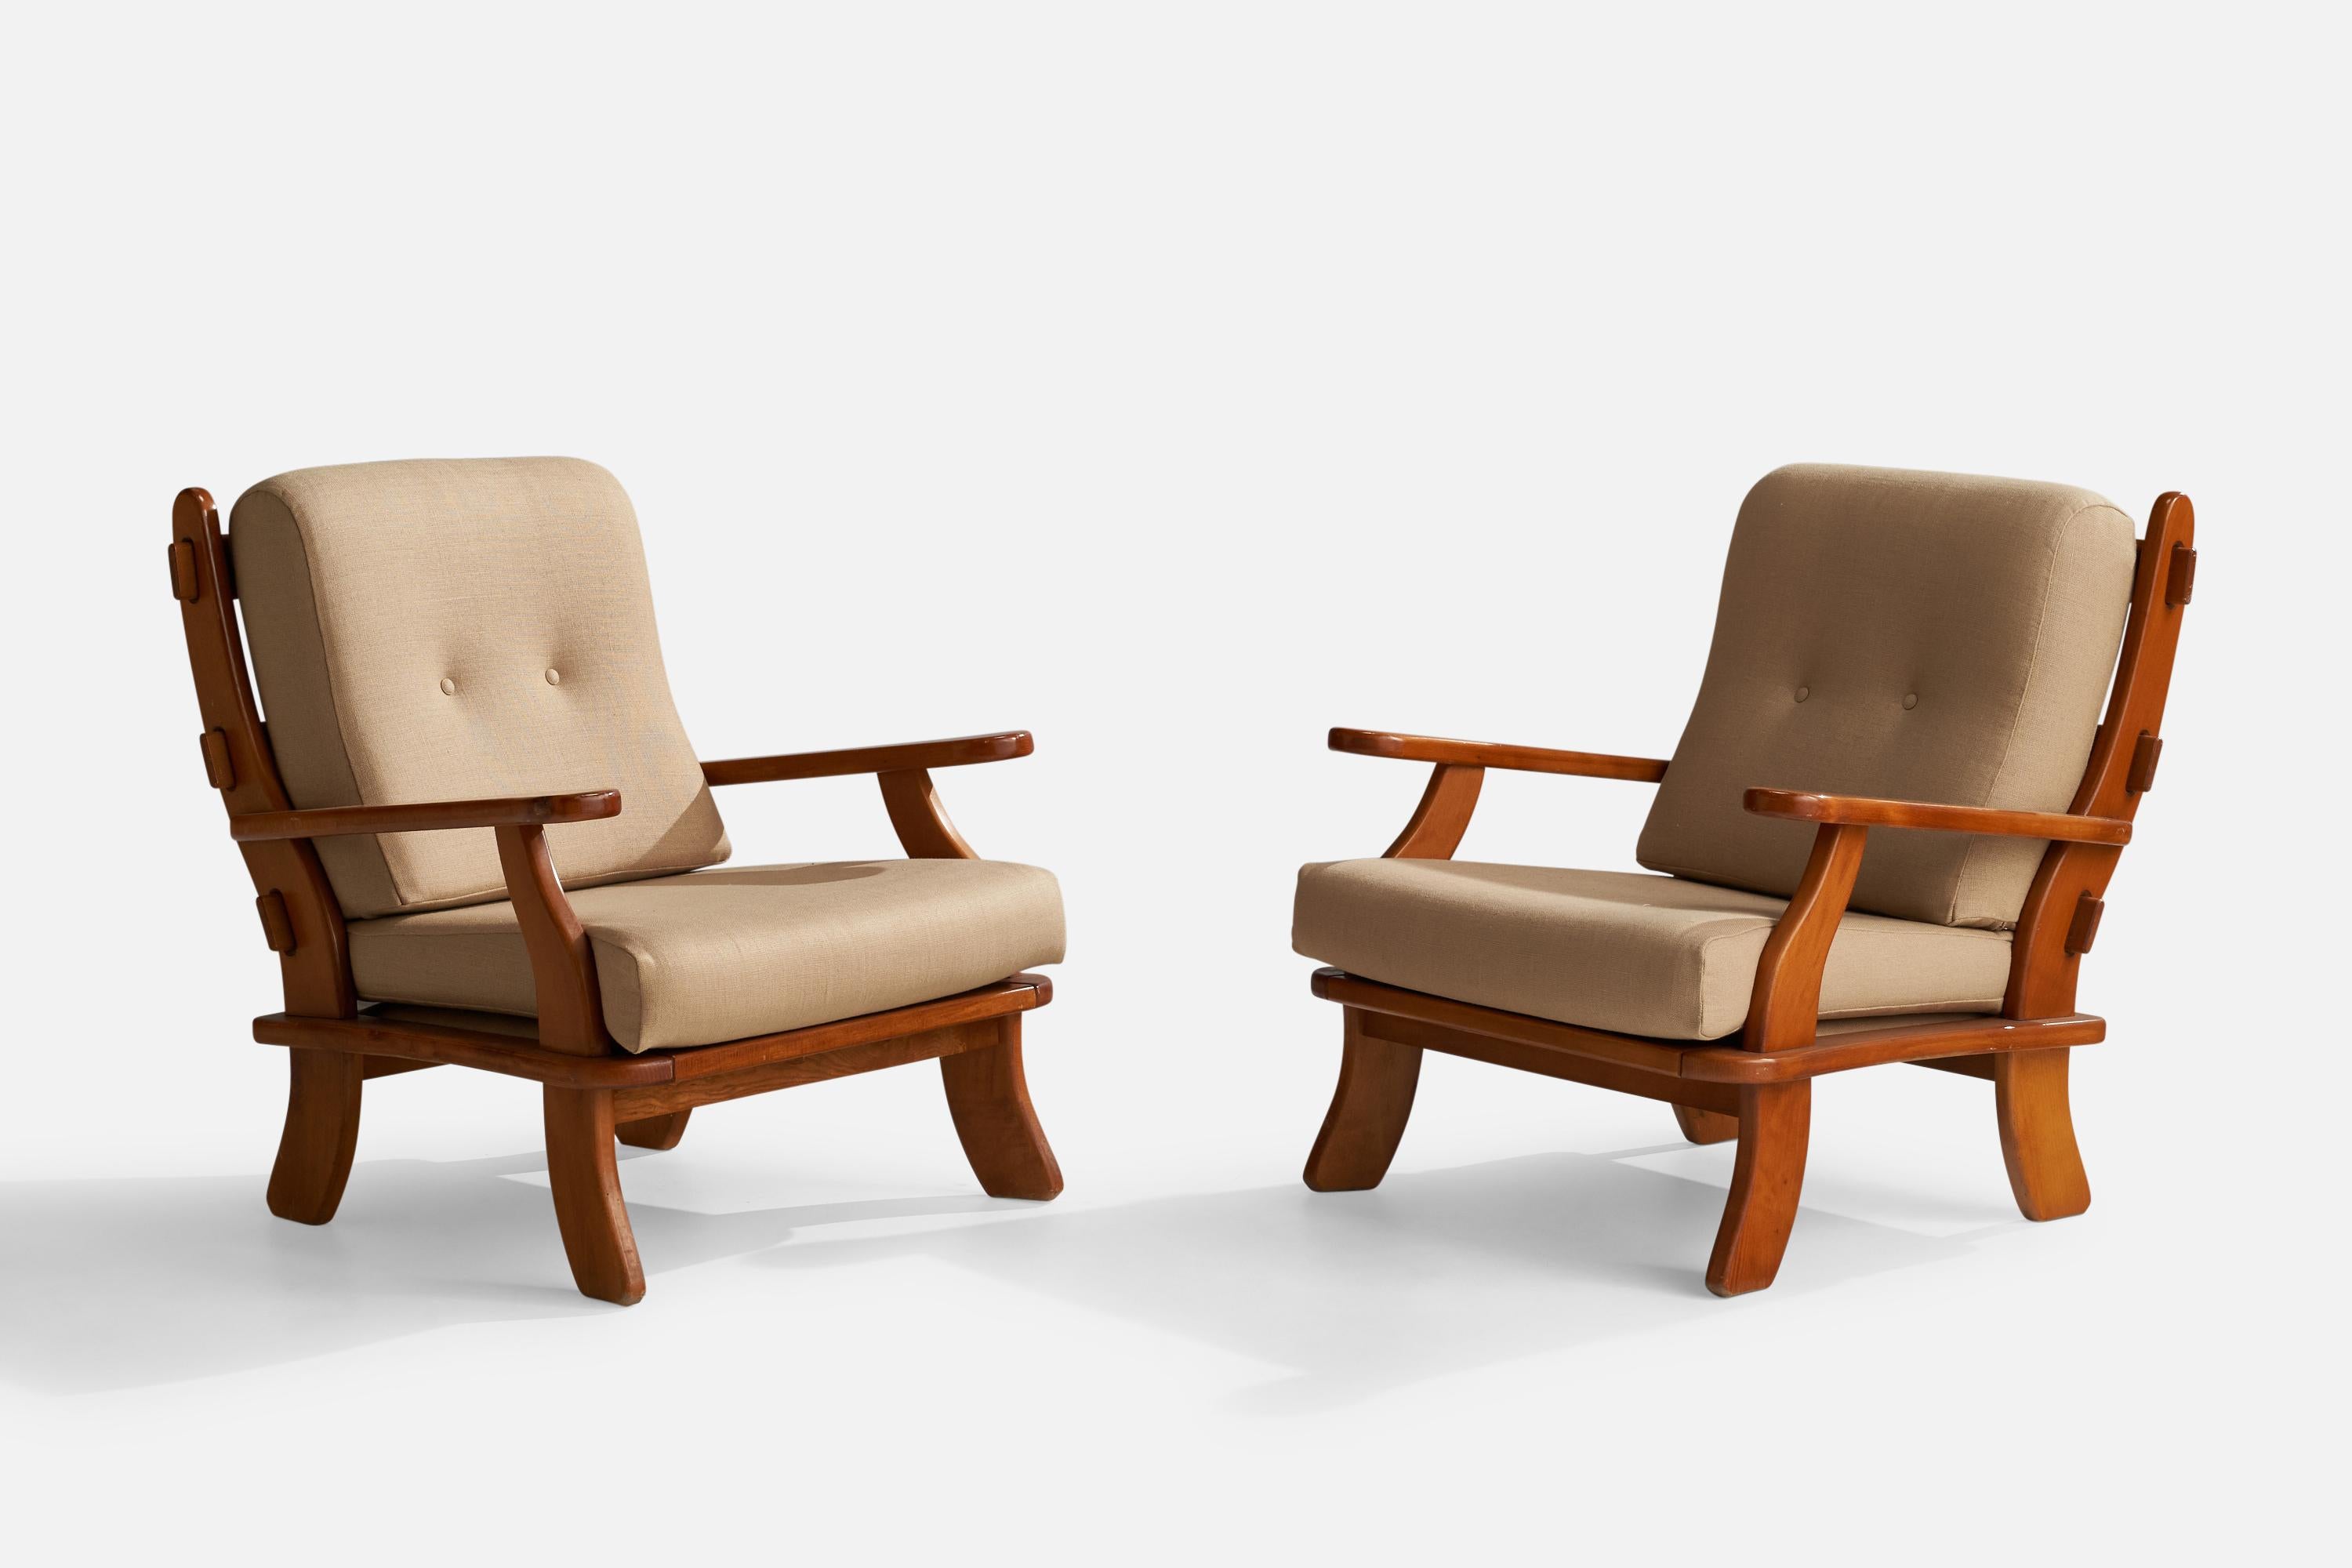 A pair of pine and beige fabric lounge chairs designed and produced in Italy, 1970s.

Seat height 16”